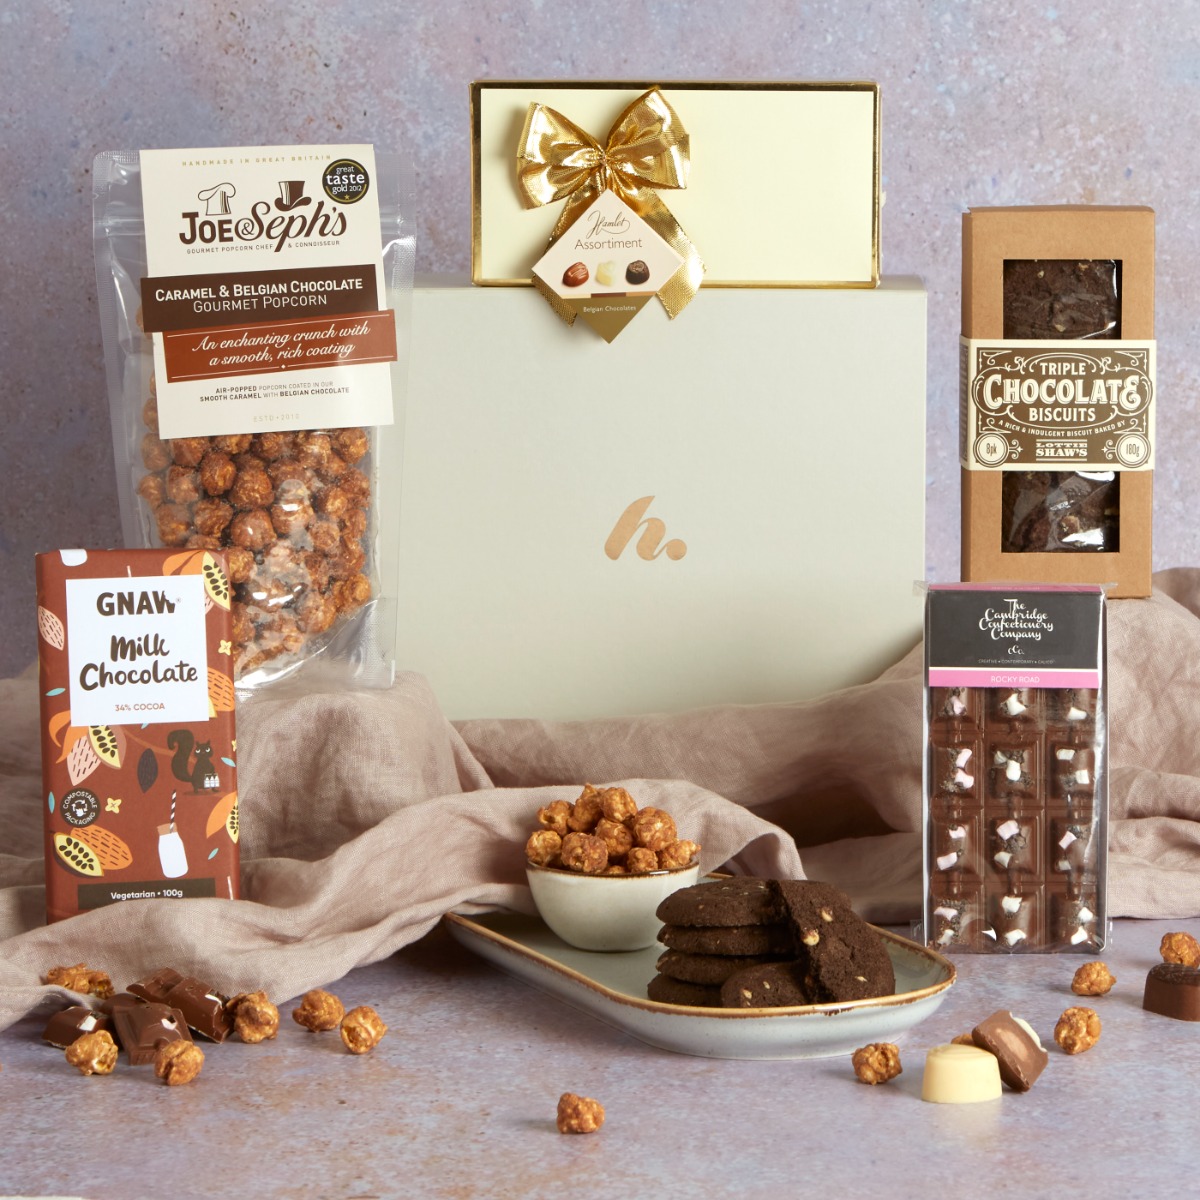 Heavenly Chocolate Hamper with chocolate treats on display, perfect for Easter